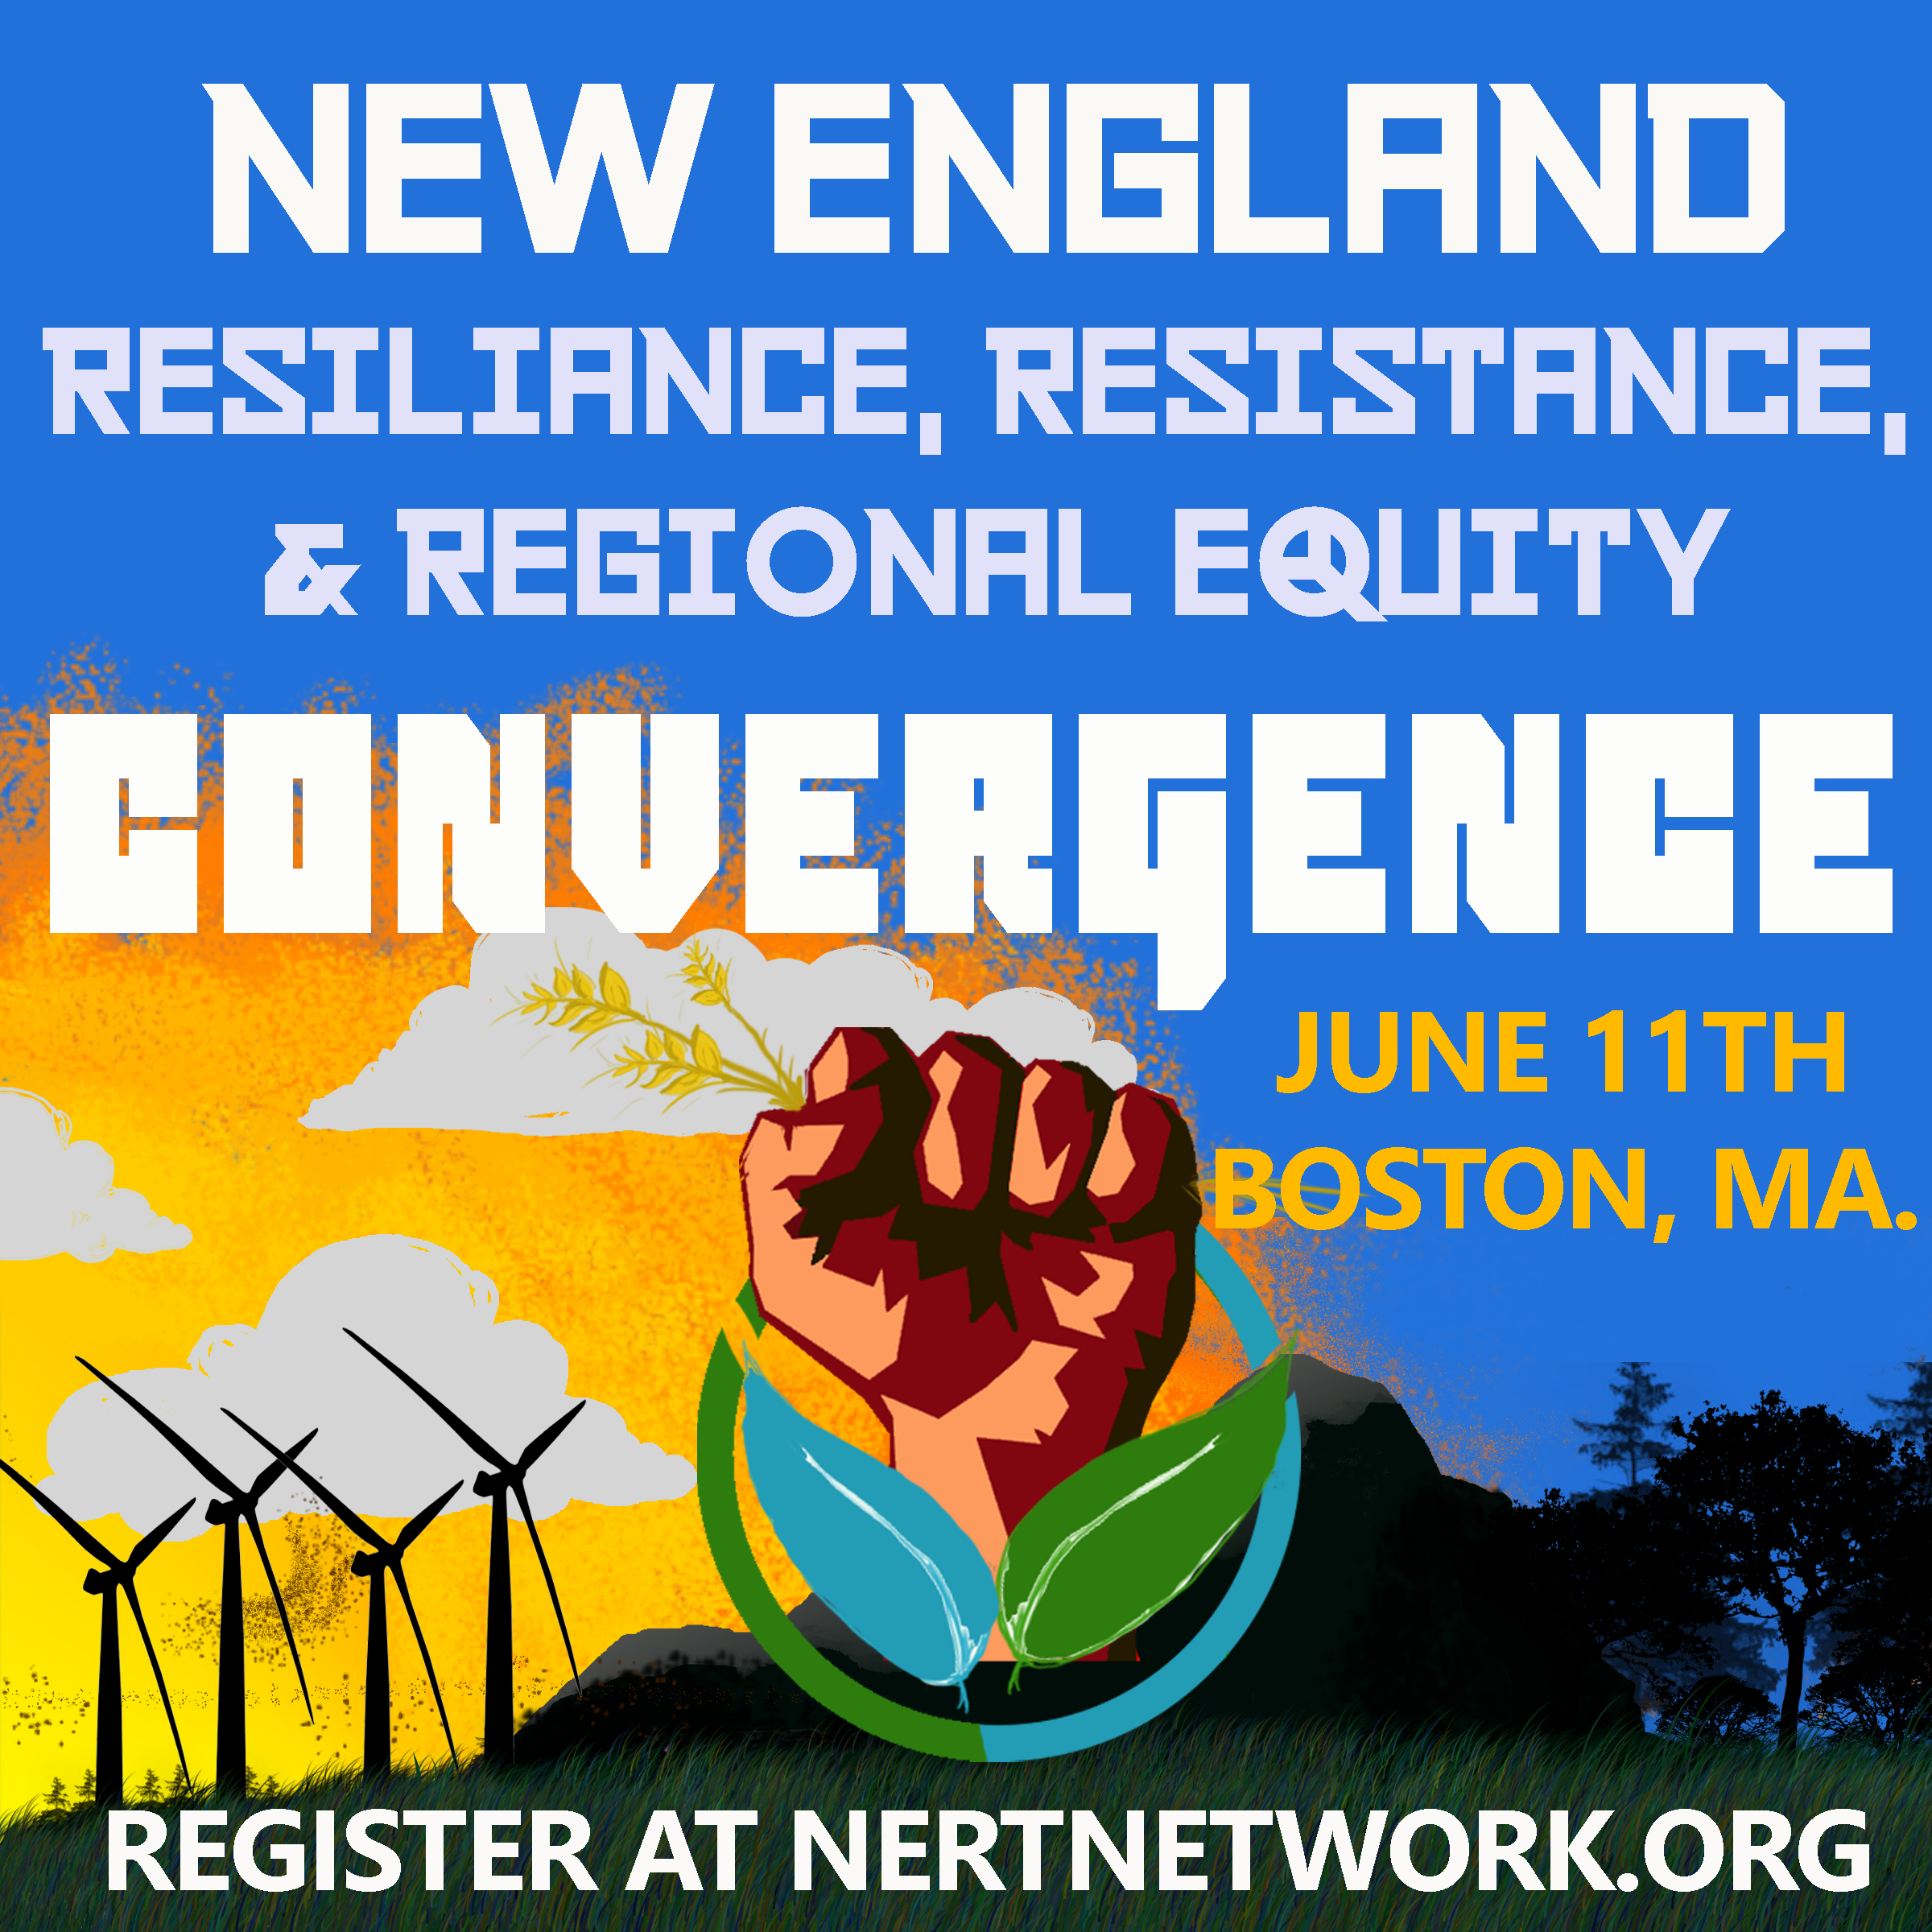 The Resilience, Resistance & Regional Equity Convergence